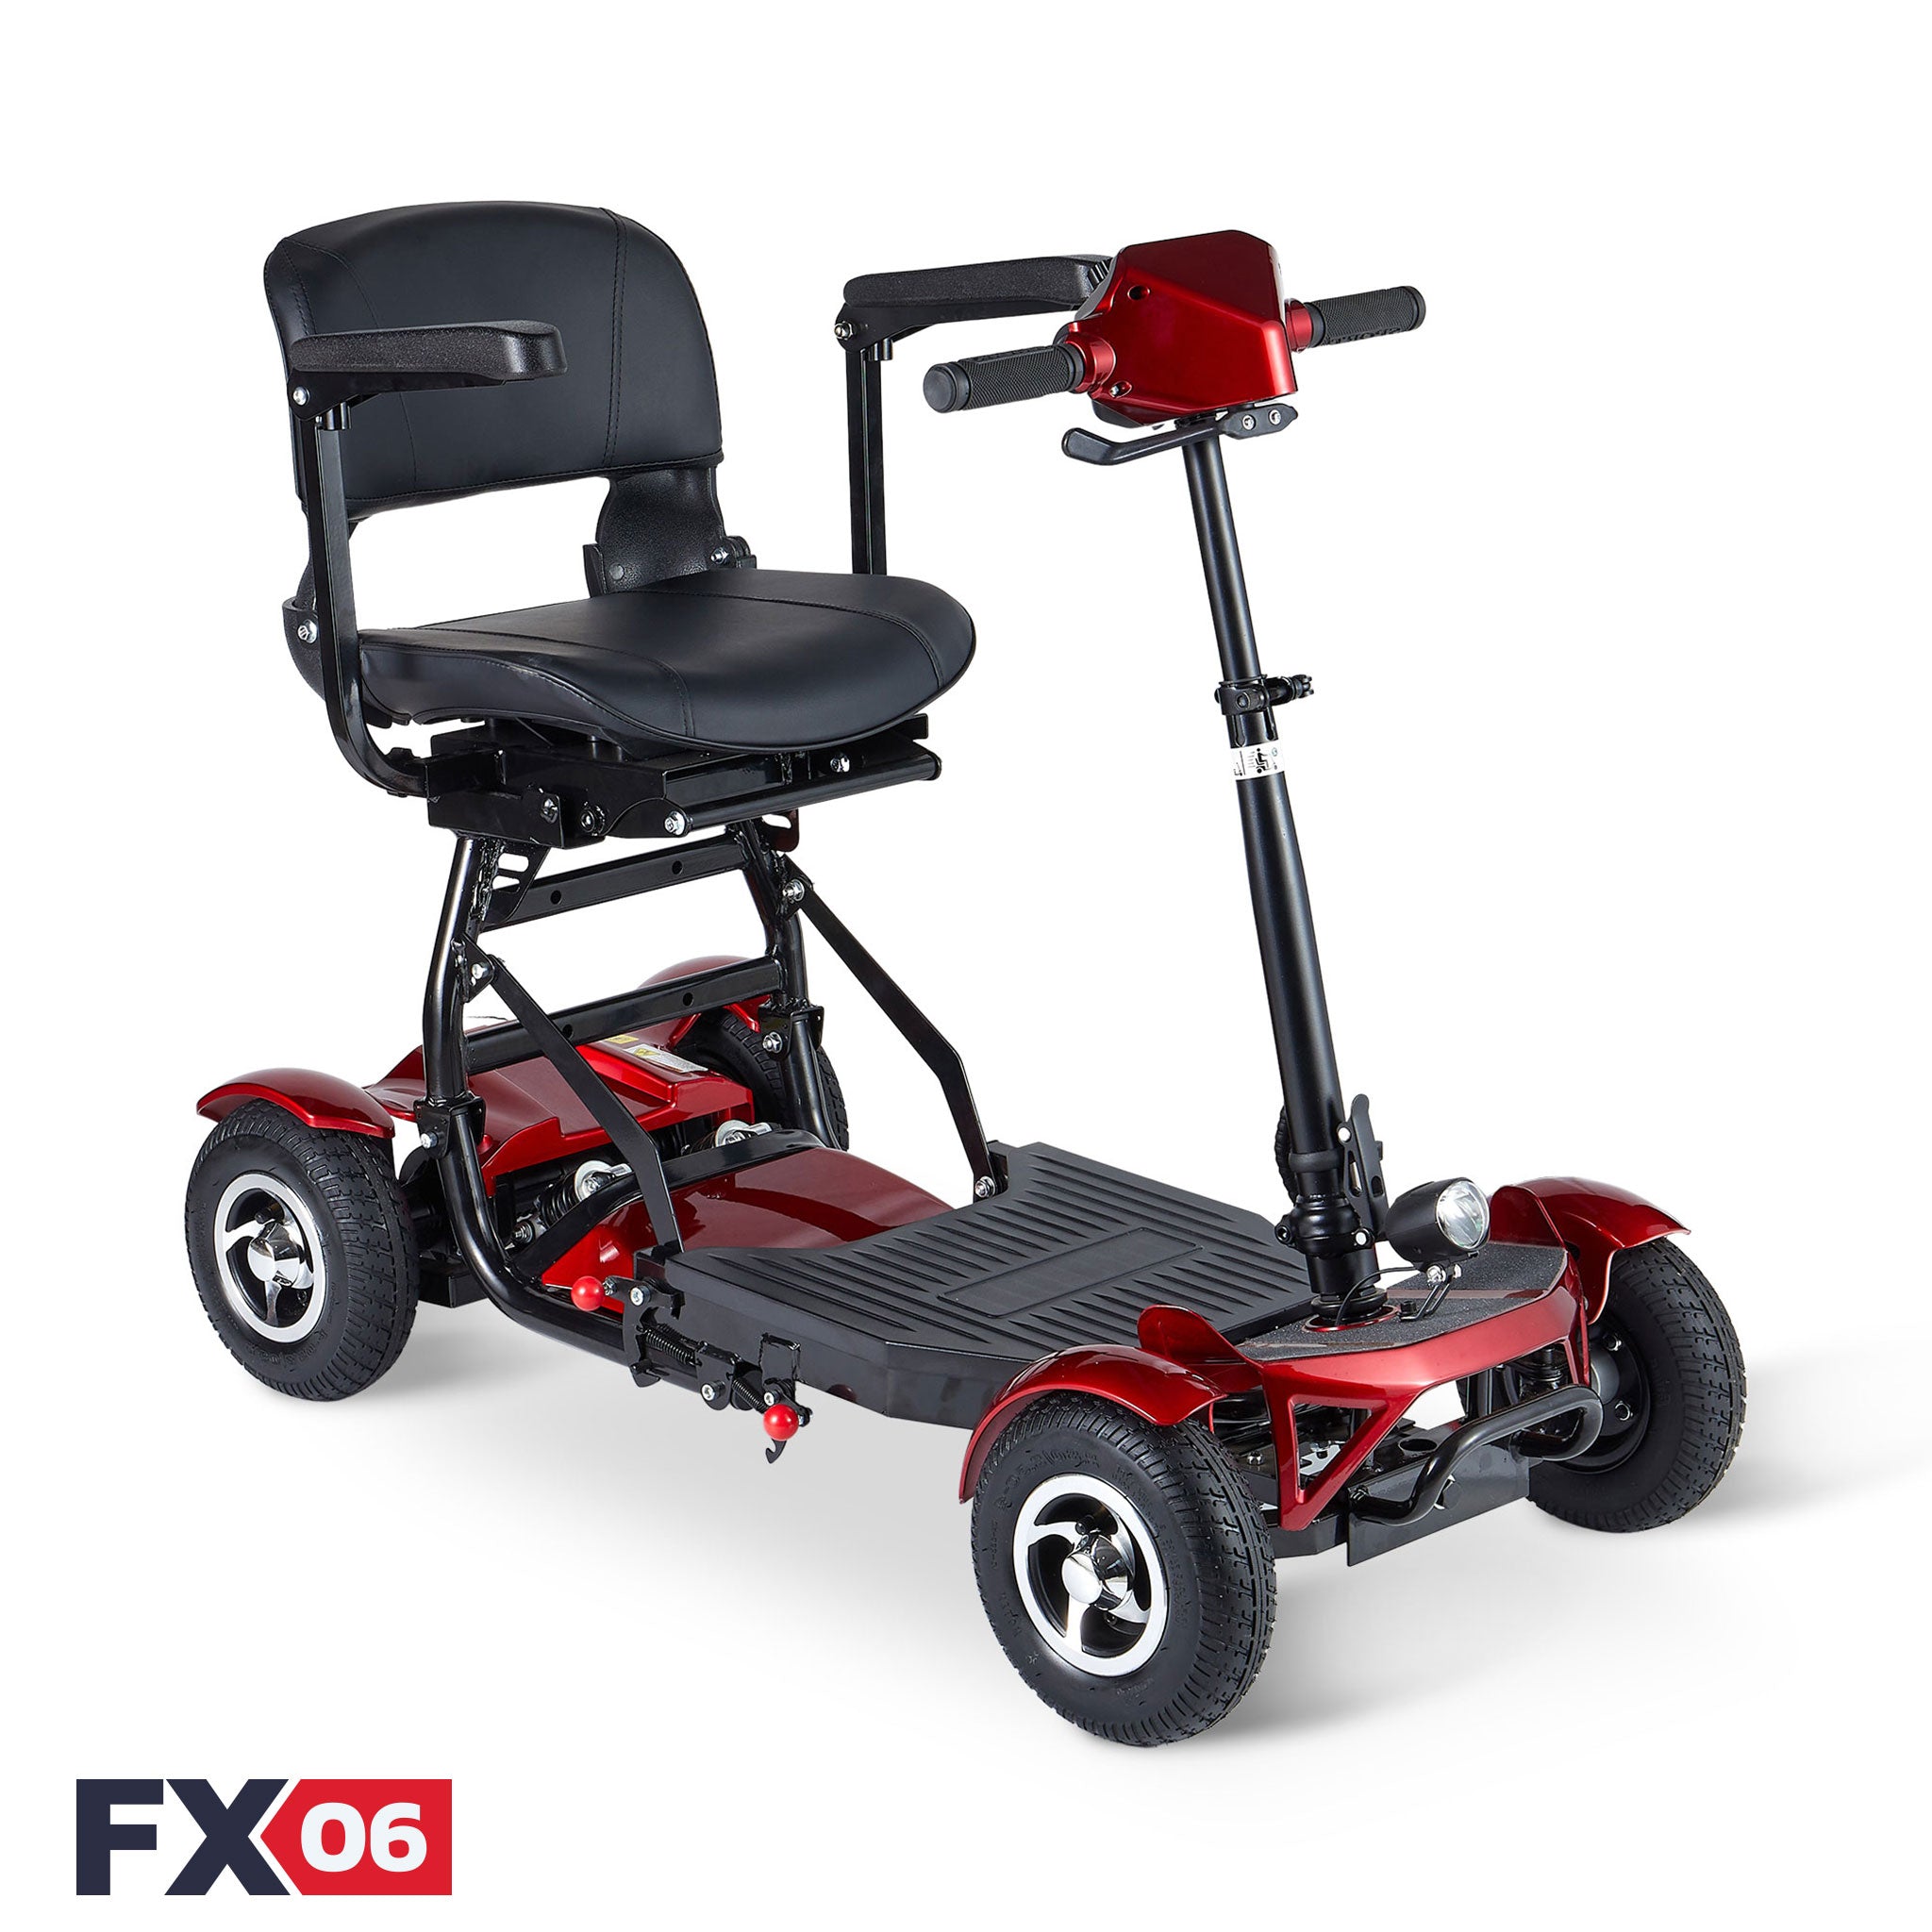 Rubicon FX06 All Terrain Foldable Mobility Scooters - Electricwheelchair.Store